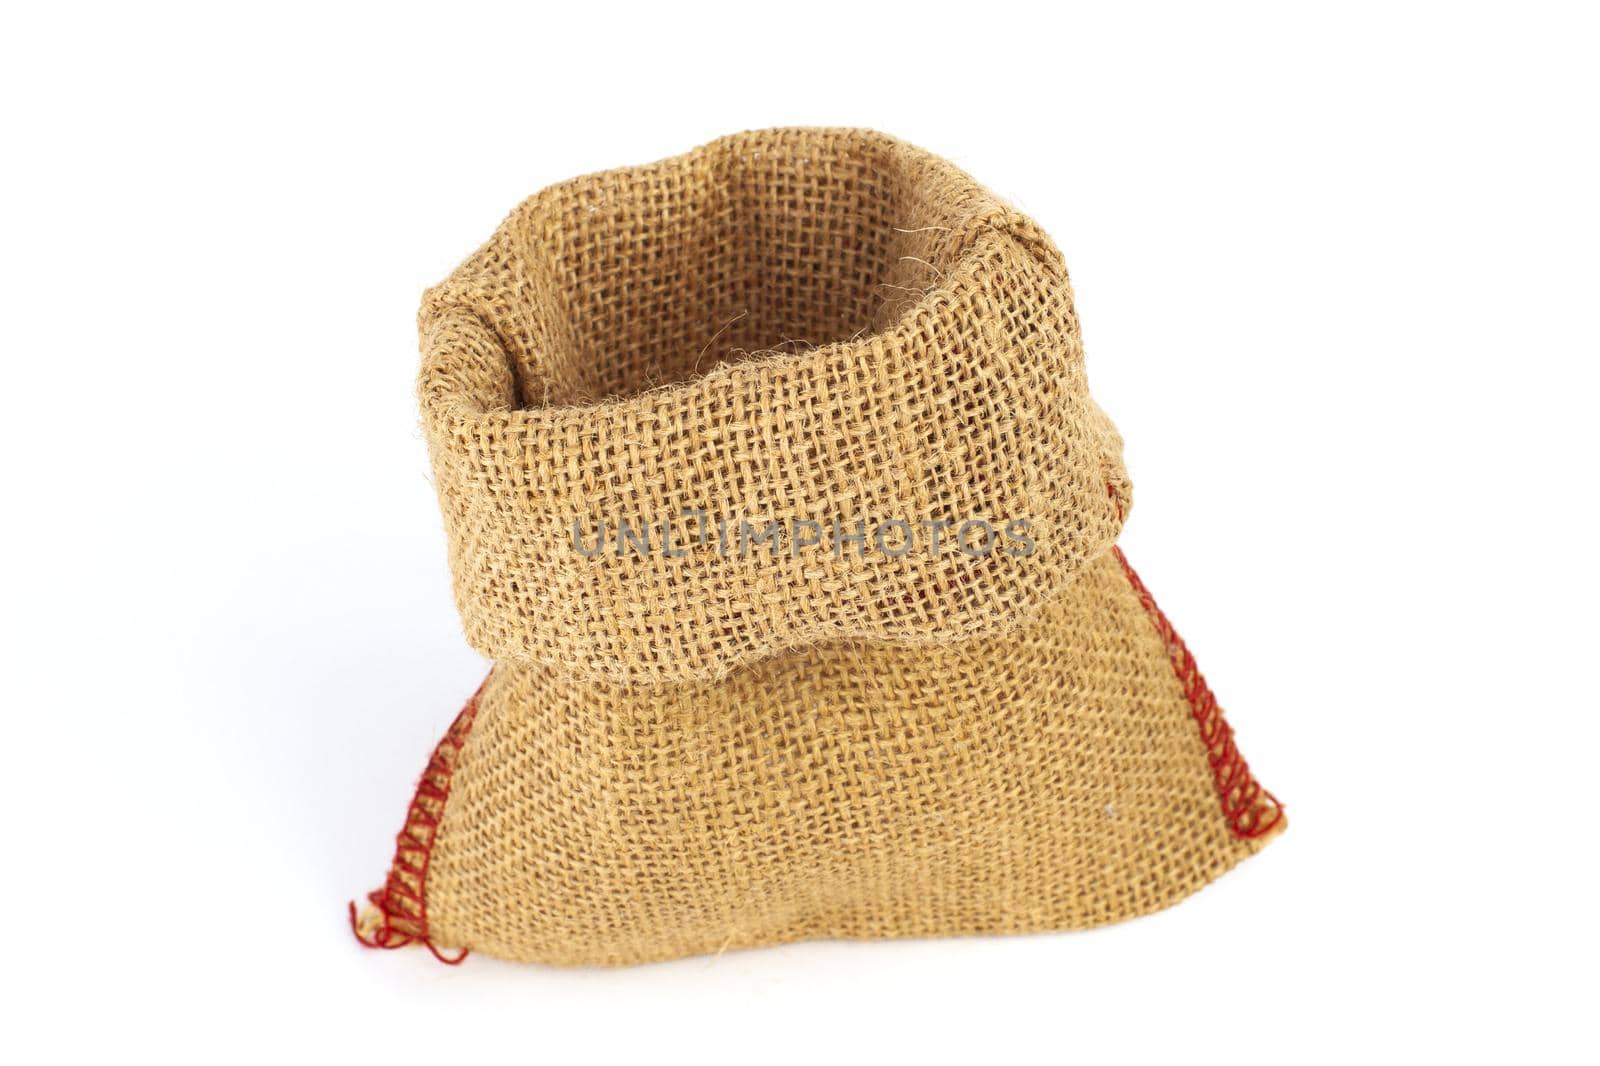 Empty burlap bag or sack to be filled in isolated on white background